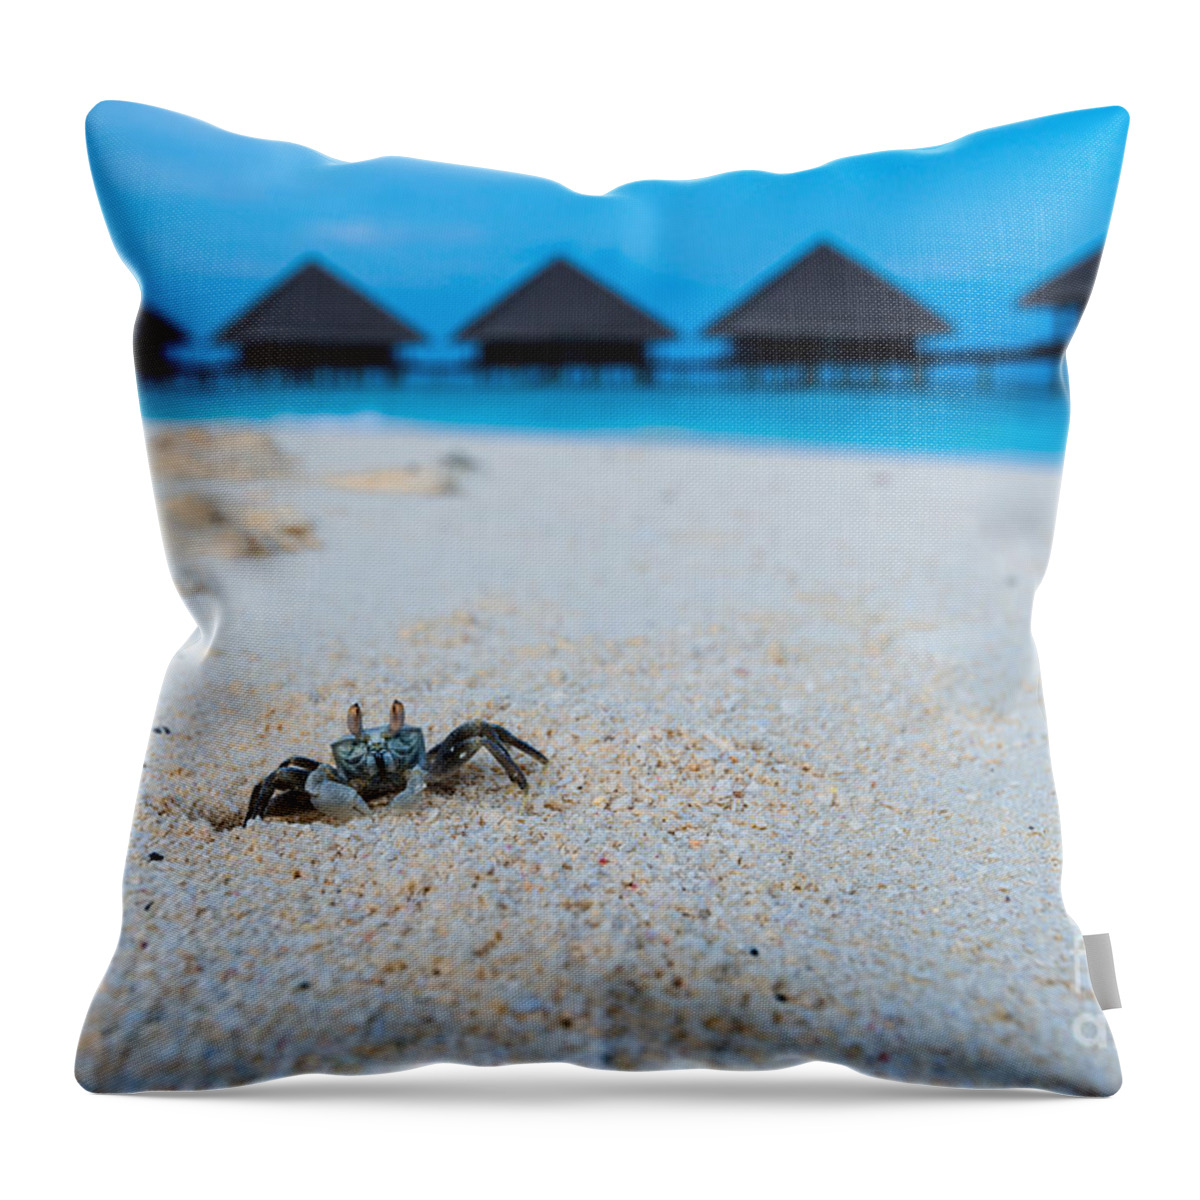 Animal Throw Pillow featuring the photograph Mr. Crab by Hannes Cmarits